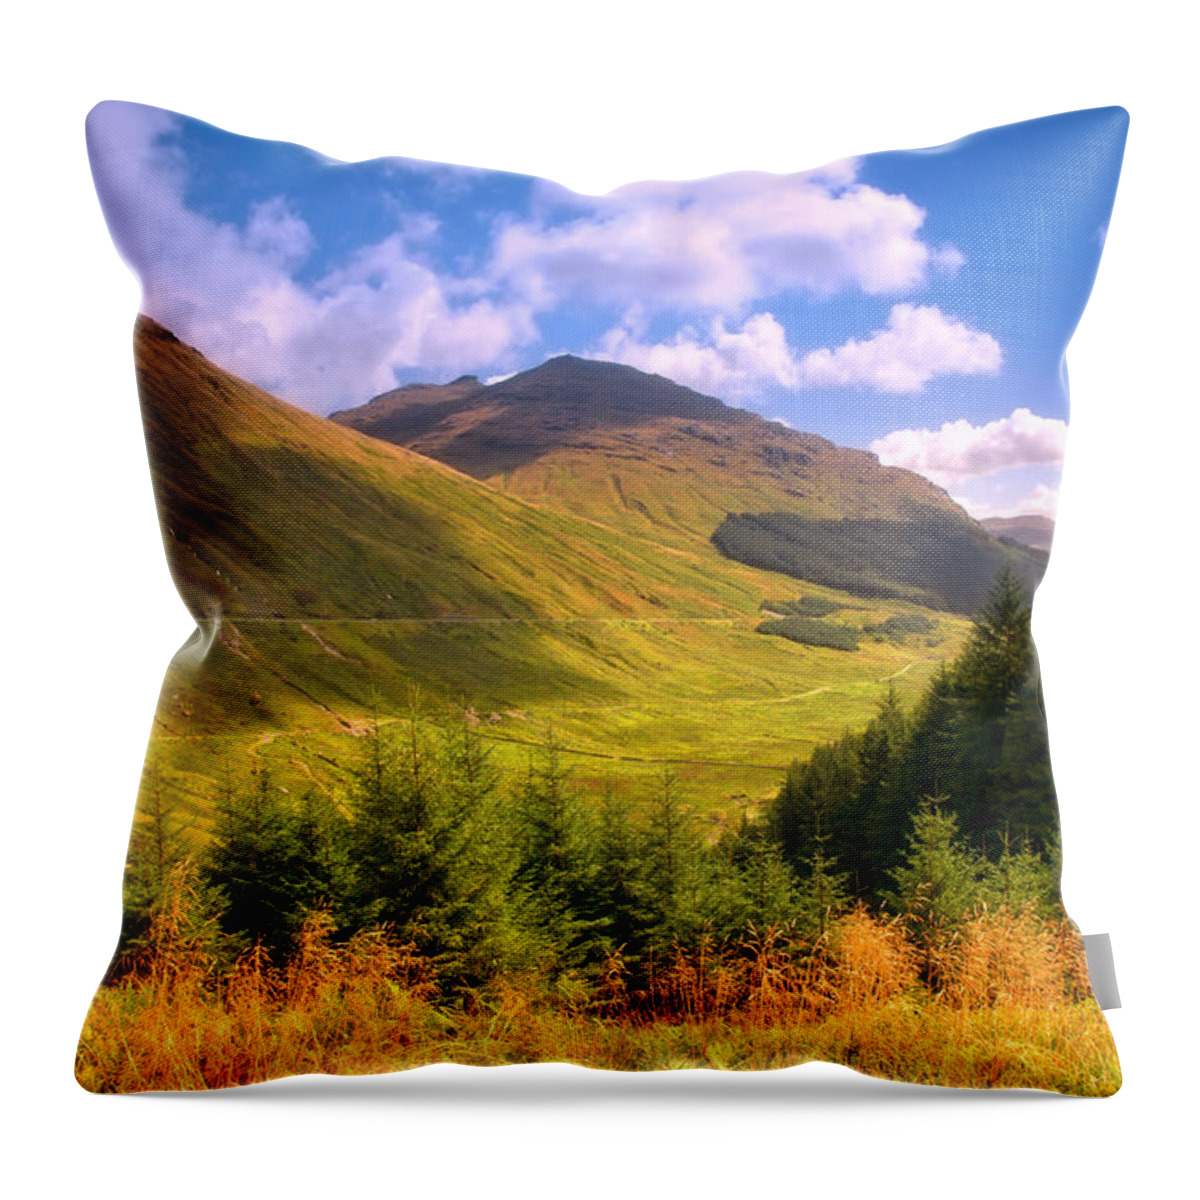 Scotland; Mountains; Rest And Be Thankful; Nature; Landscape; Bright Light; Light; Sun; Sunny; Warm Weather; Sky; Clouds; Scenery; Forest; Trees; Tranquility; Grass; Autumn; Summer; Beauty; Beautiful Nature; Fine Weather; Colorful; Colors; Shadow; Fine Art; Fine Art Photography; Artistic; Blesses Throw Pillow featuring the photograph Peaceful Sunny Day in Mountains. Rest and Be Thankful. Scotland by Jenny Rainbow